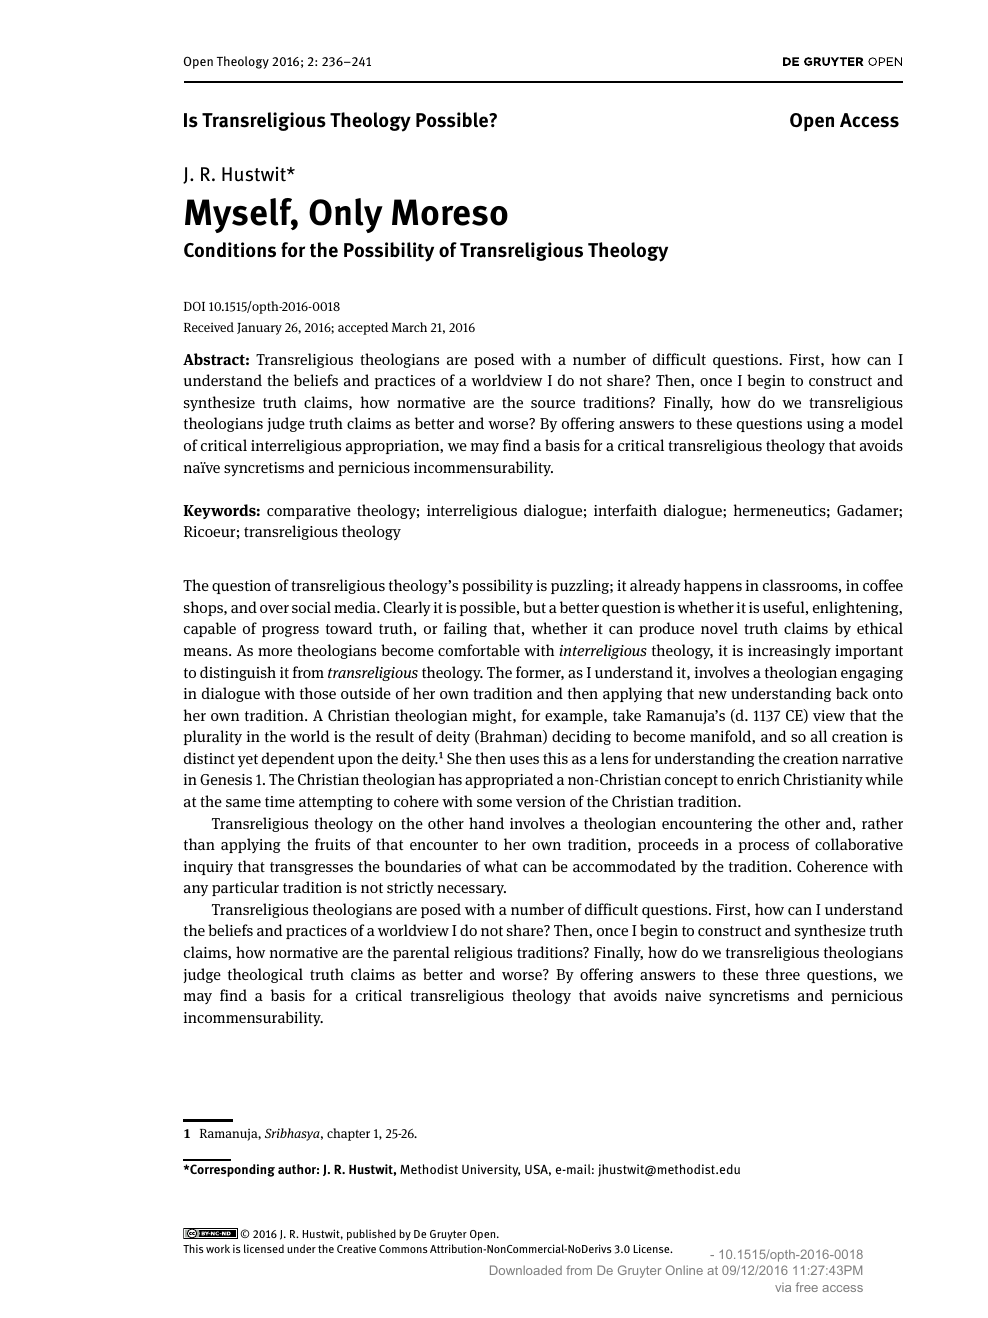 Myself, Only Moreso – topic of research paper in Philosophy, ethics and  religion. Download scholarly article PDF and read for free on CyberLeninka  open science hub.